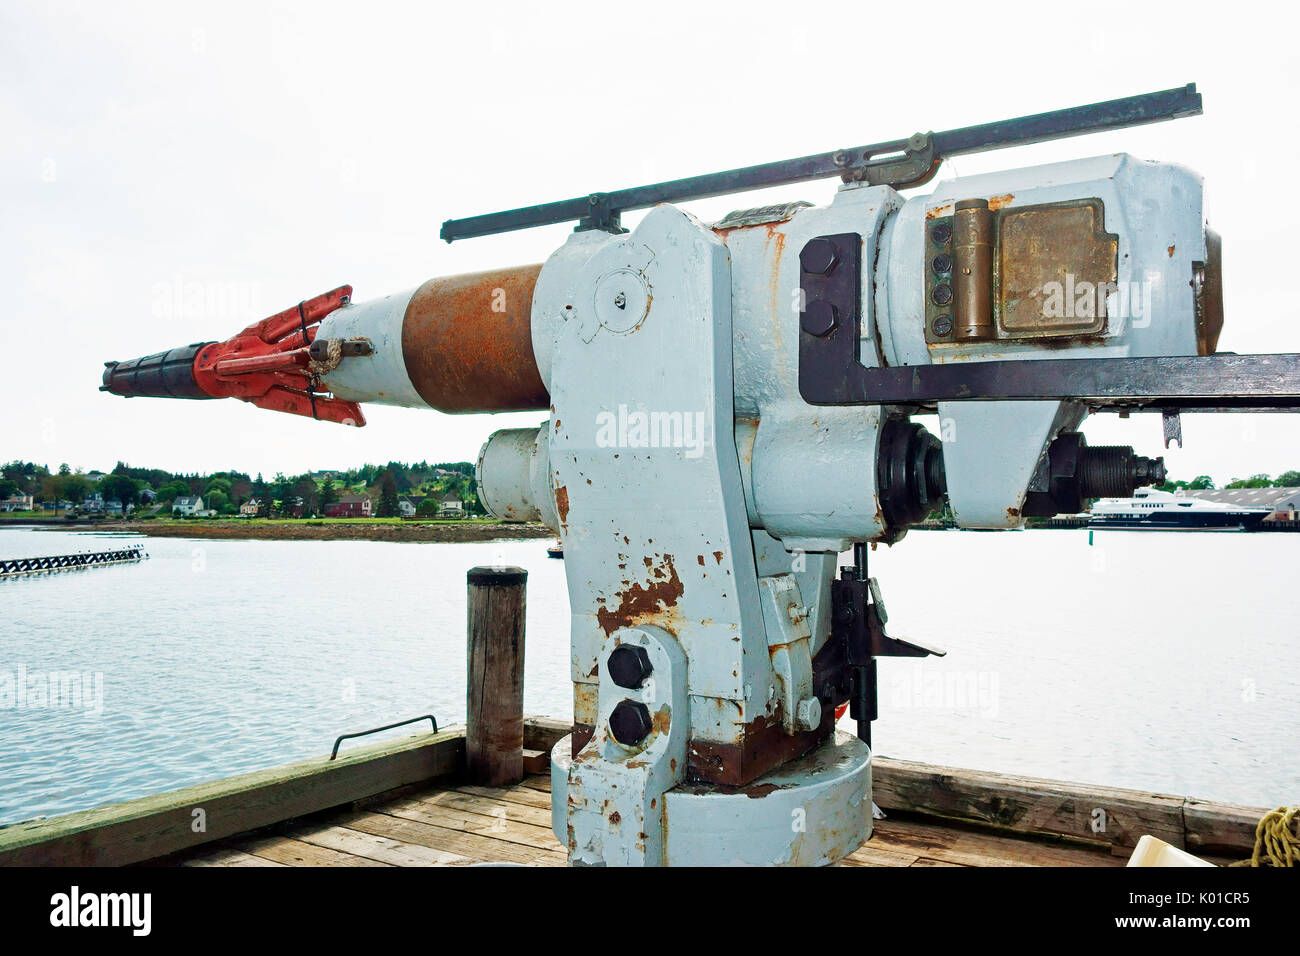 A harpoon cannon used on a whaling ship for hunting whales Stock Photo